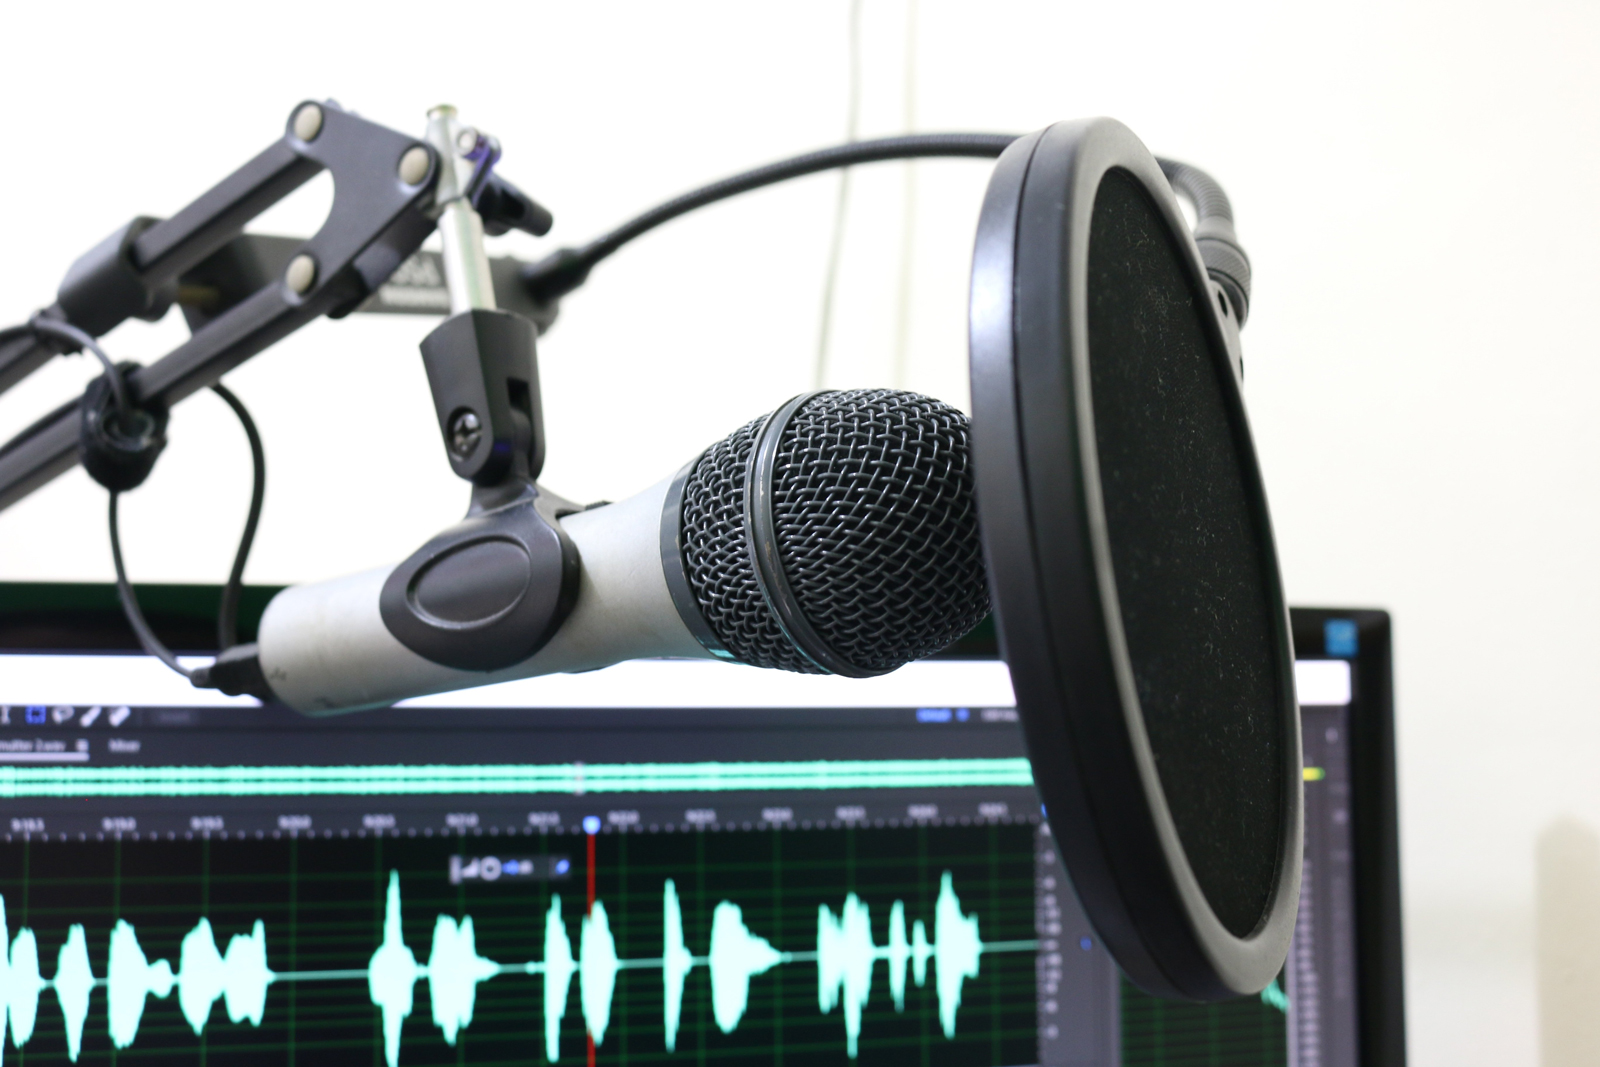 A podcast microphone set up with a screen receiving sound in the background